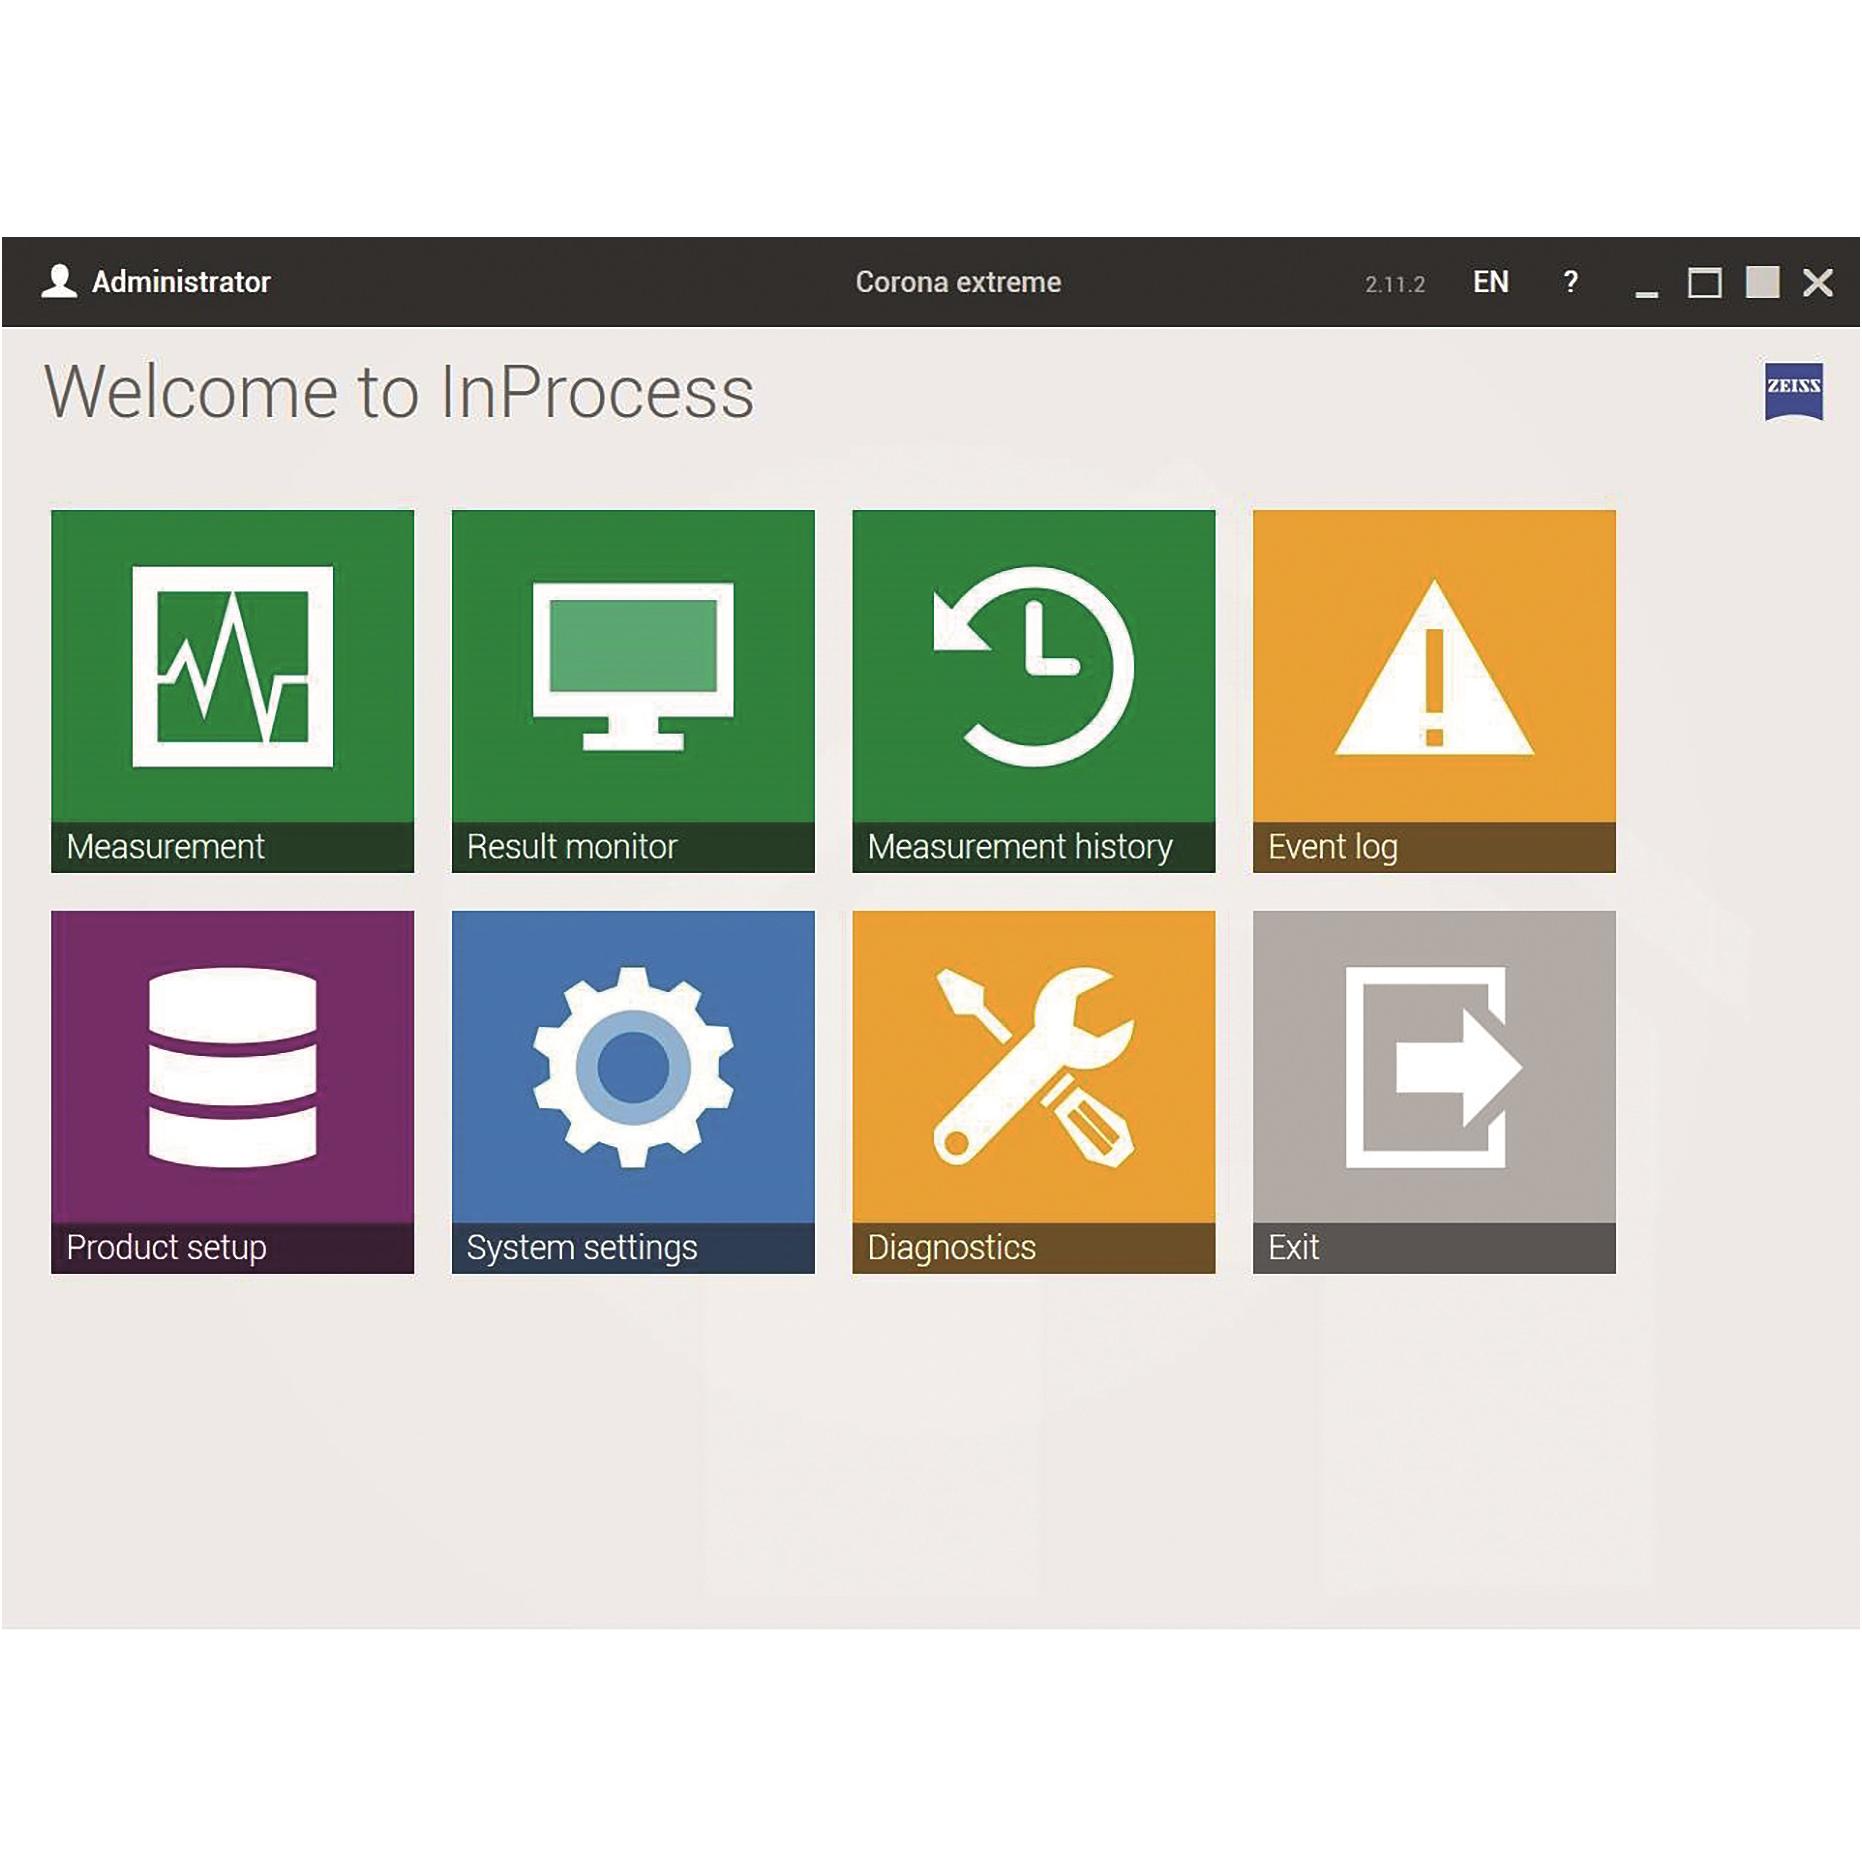 Screenshot of InProcess Software interface, icon-based and intuitive interface with clear structure